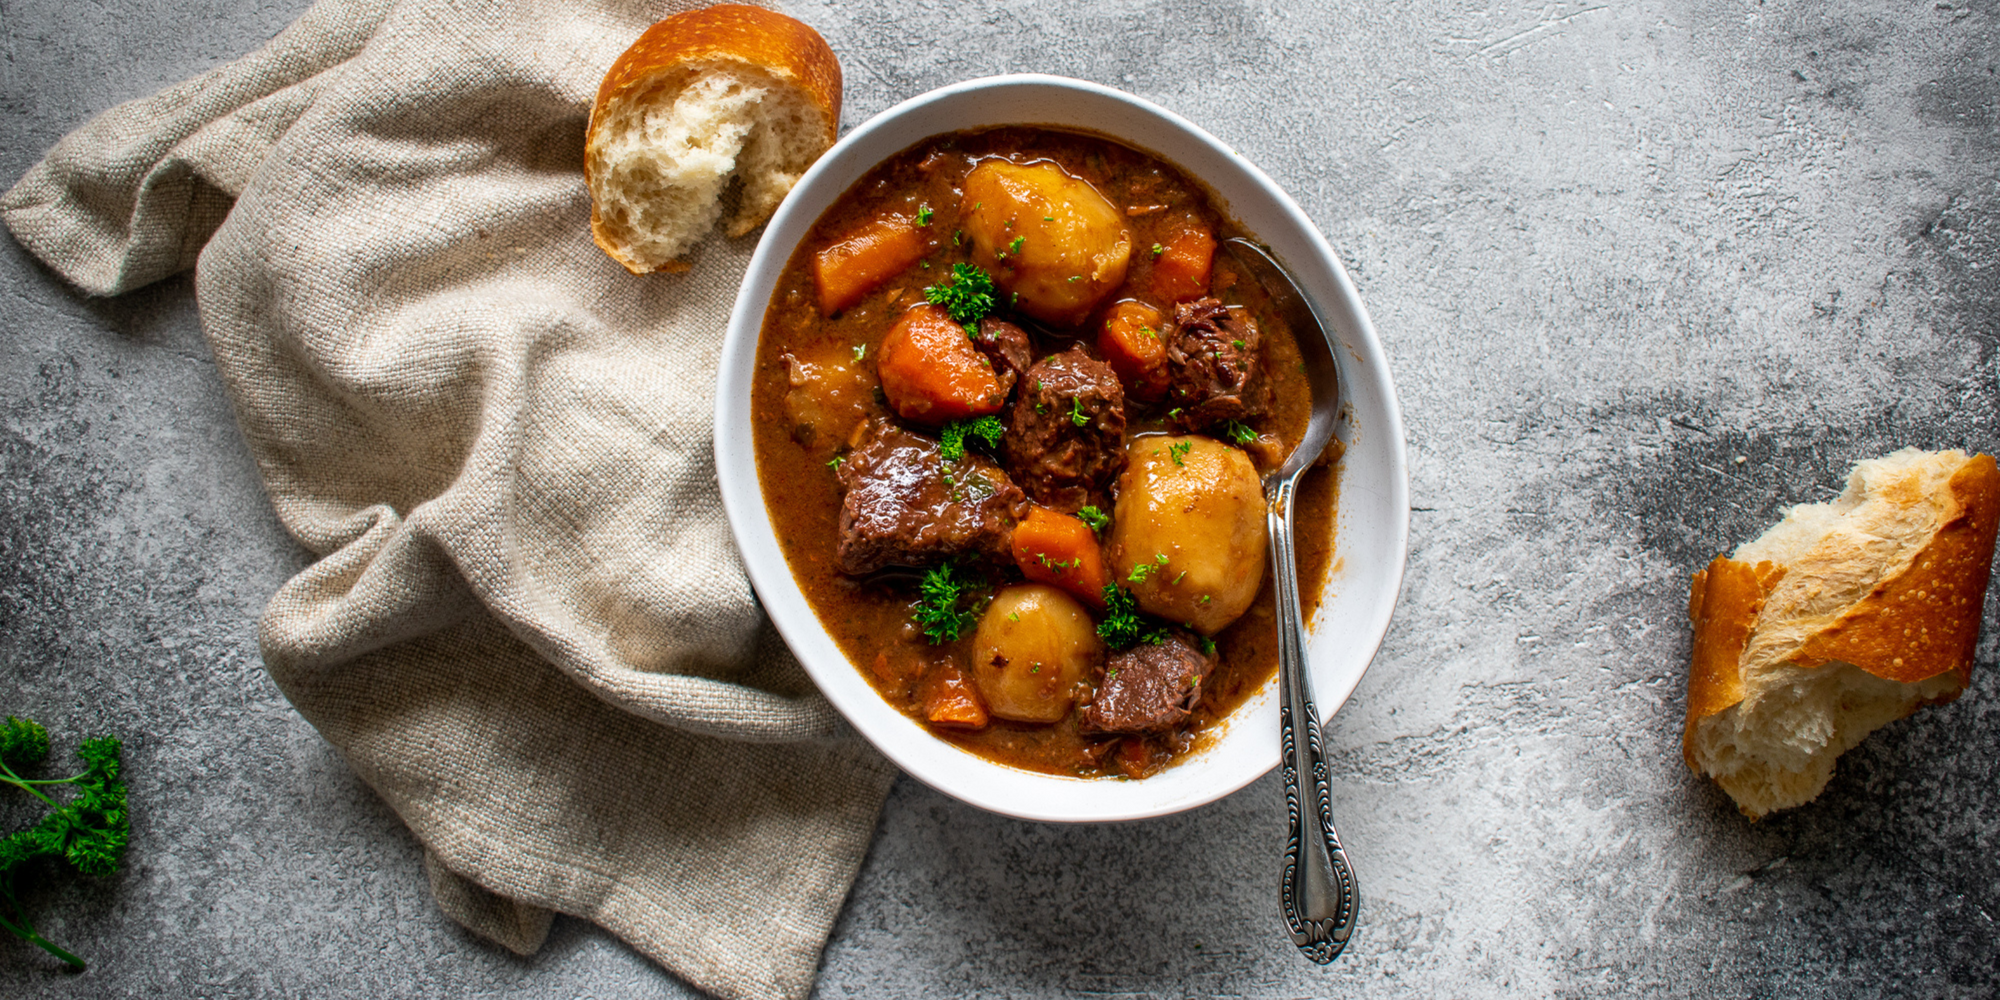 Image of Beef & Guinness Stew on table with bread